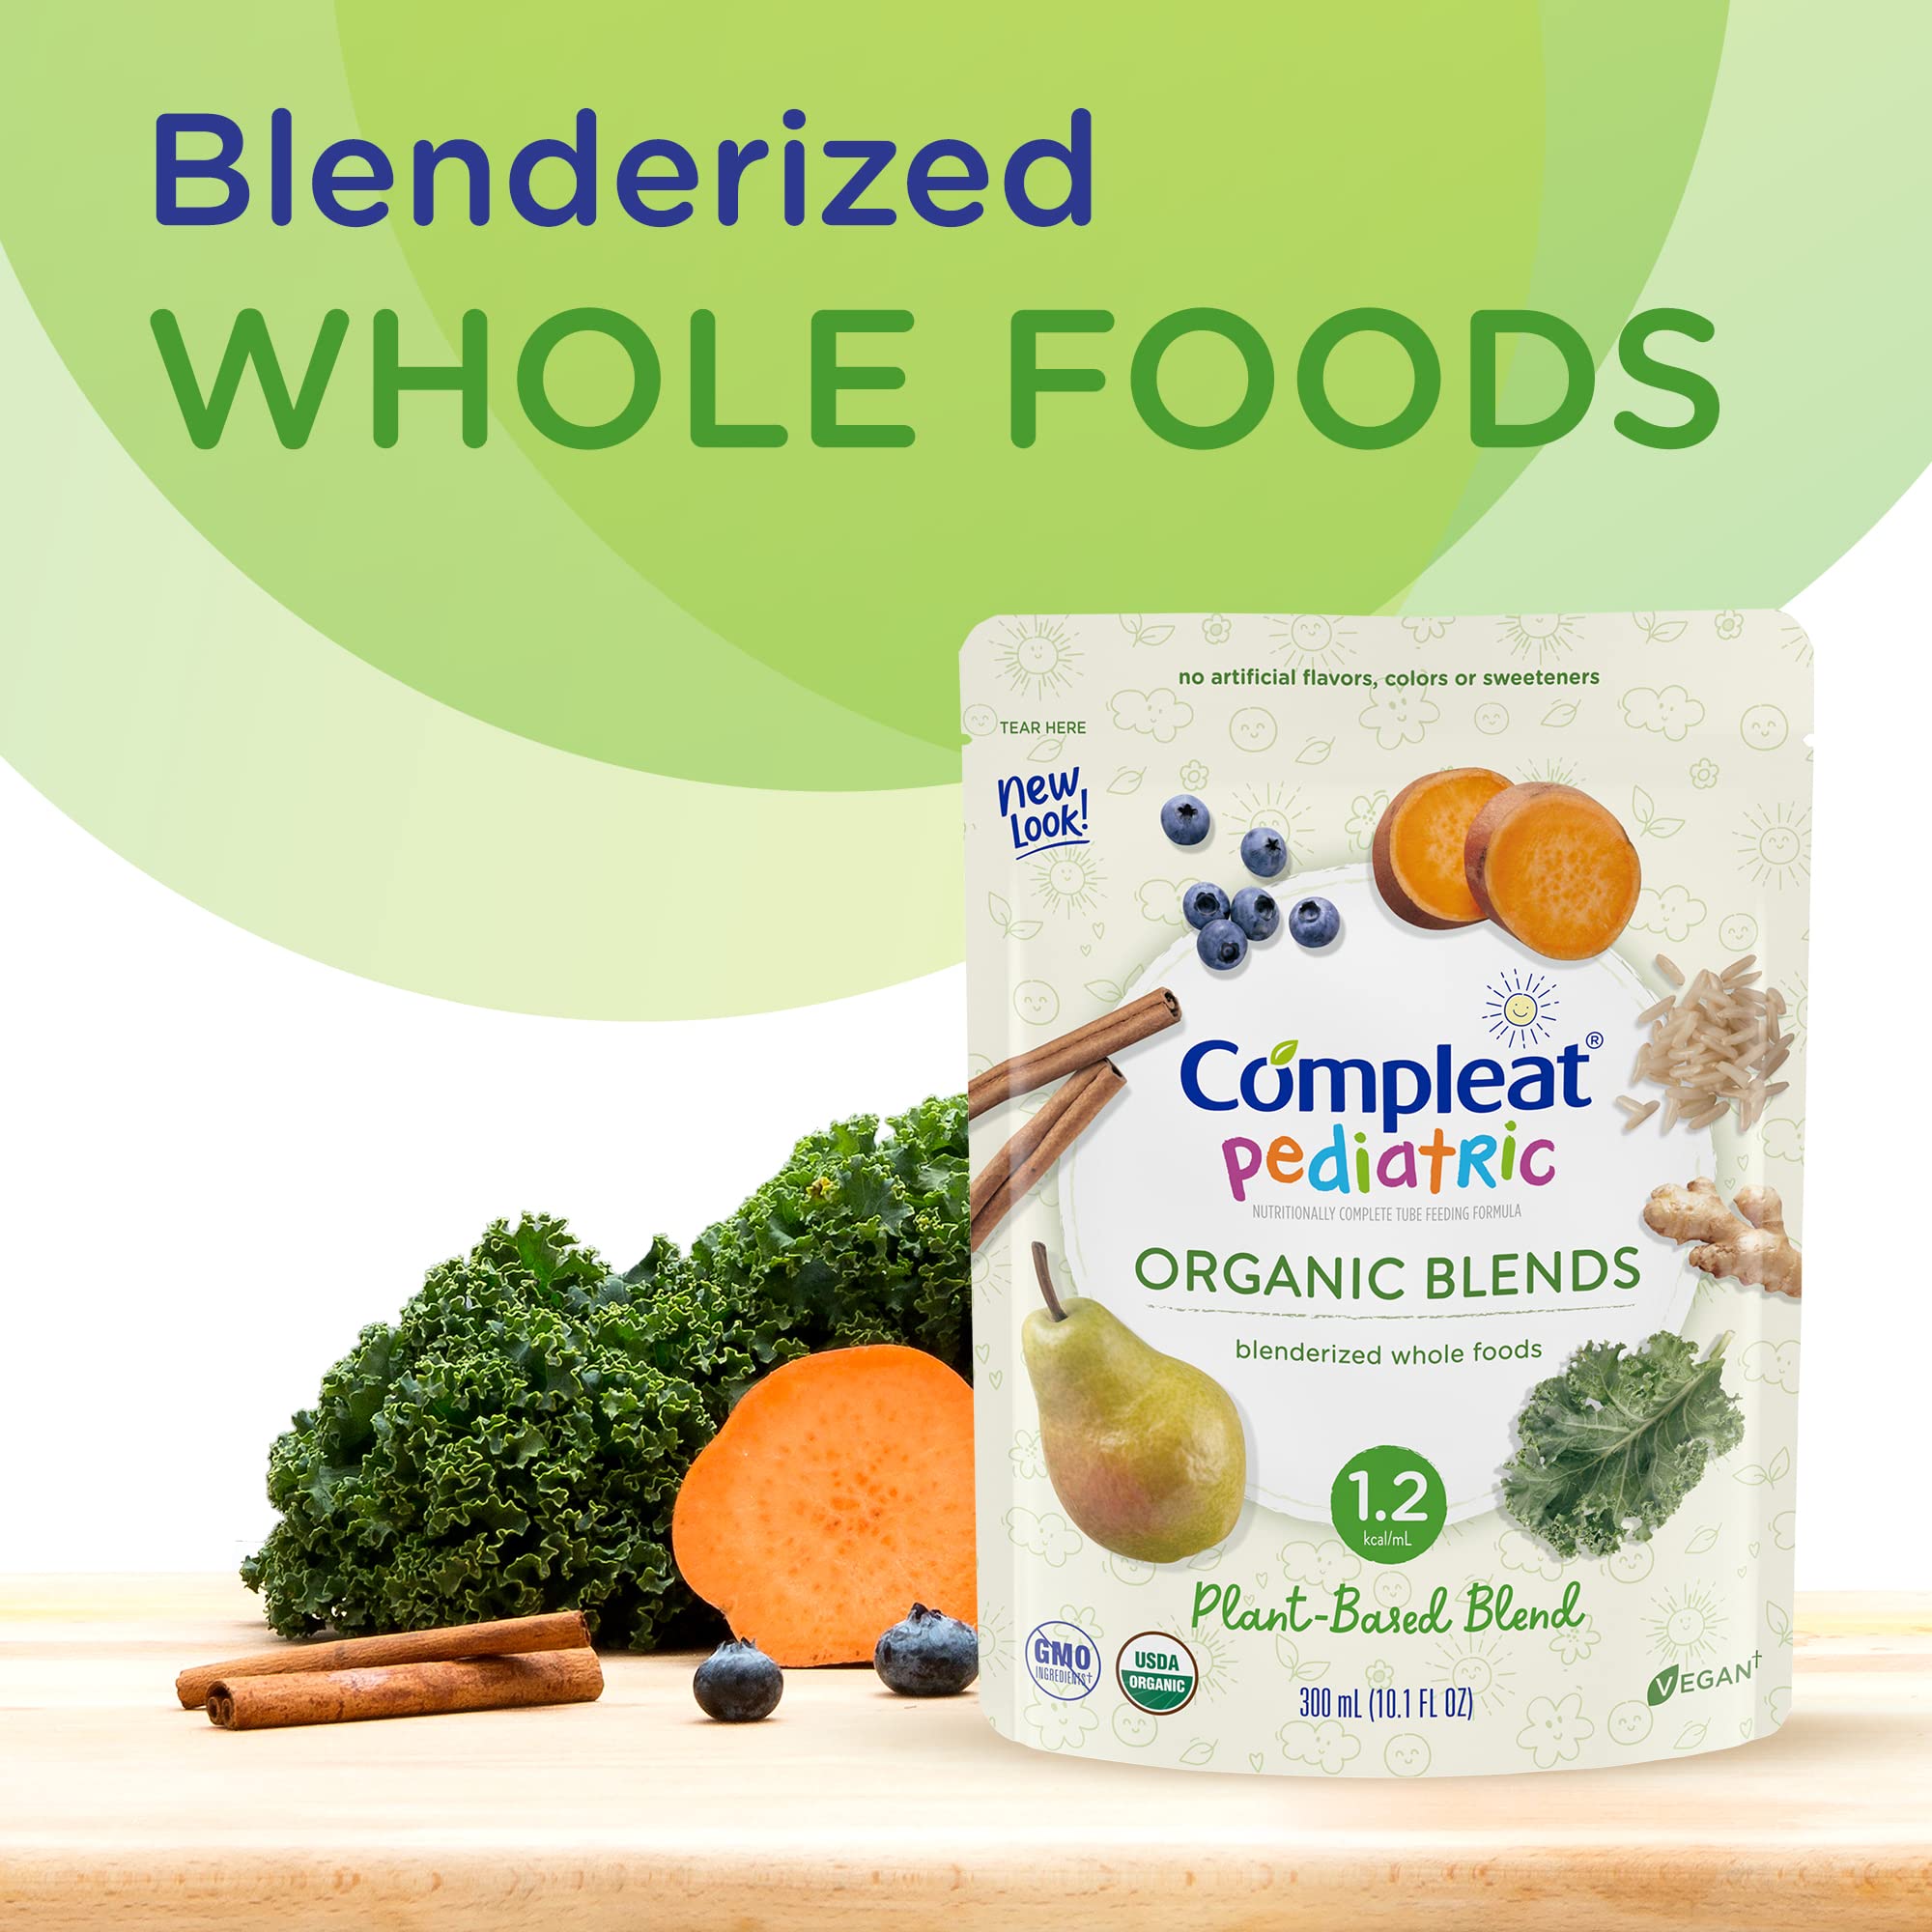 Compleat Pediatric Organic Blends Plant Based, 10.1 fl oz Pouch, 24 Count